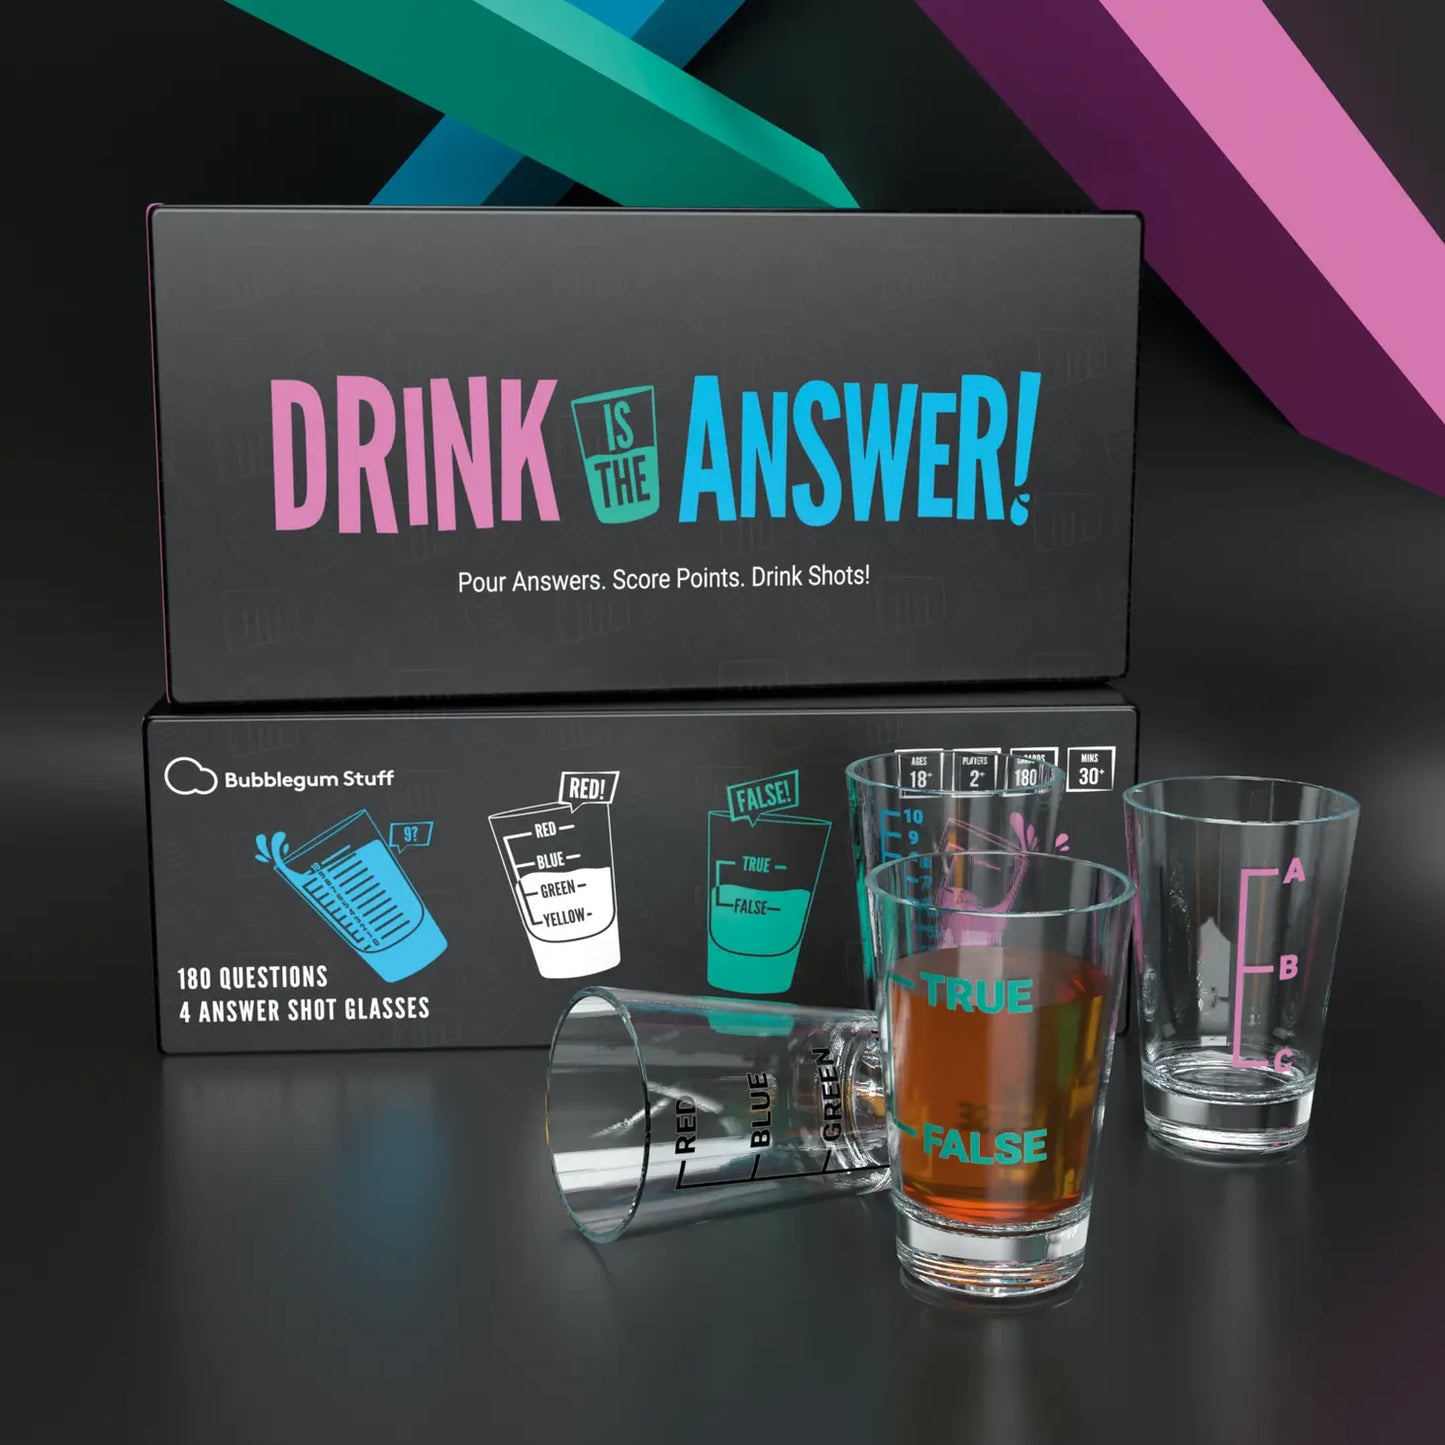 Drink Is the Answer - Drinking Game